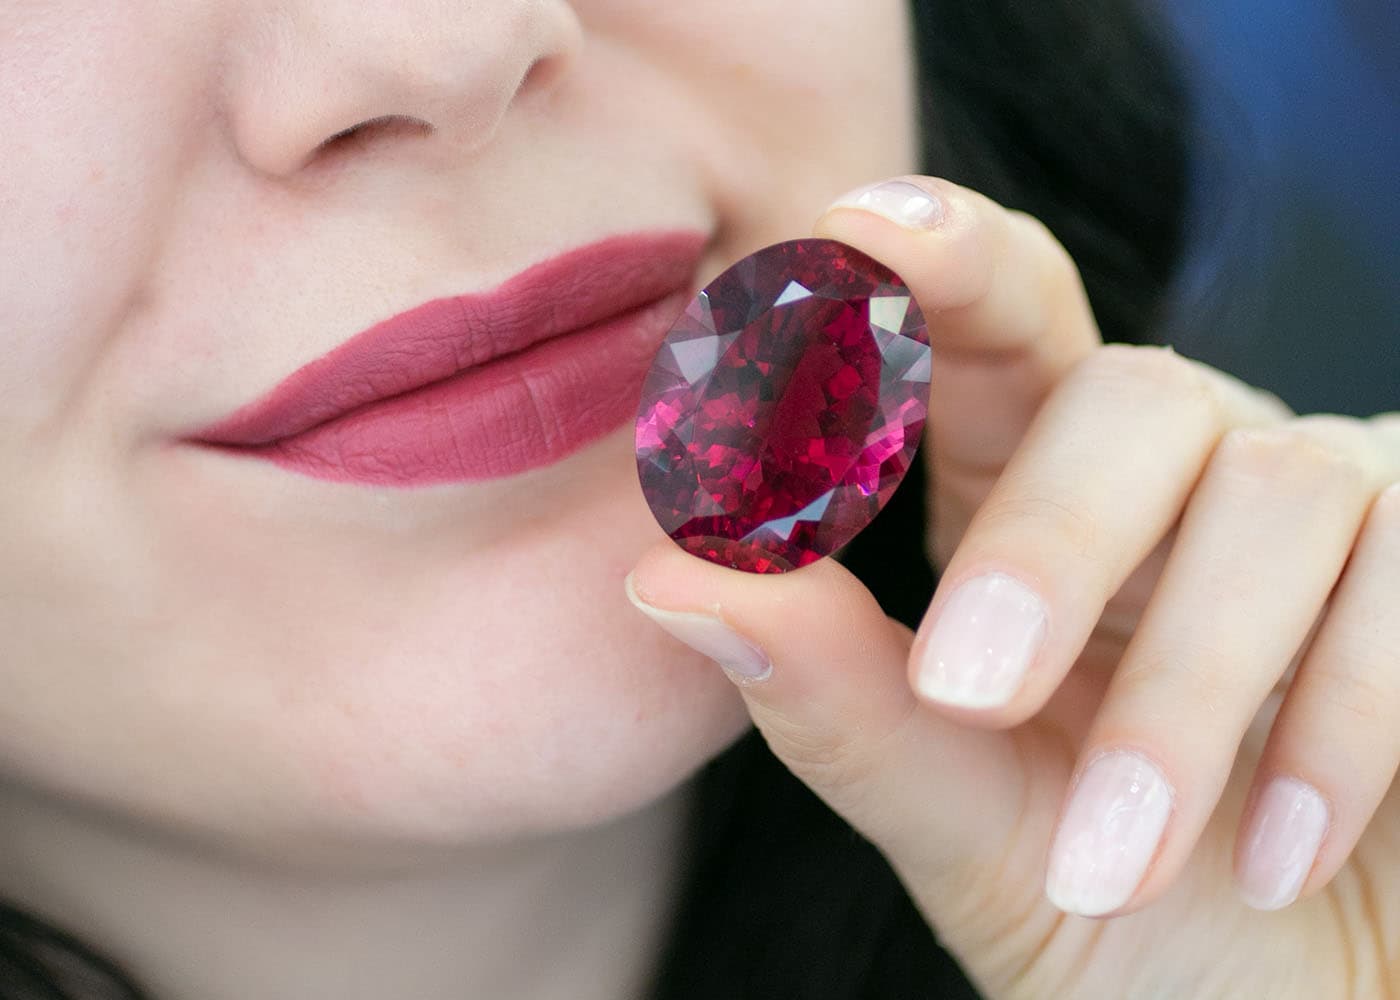 Katerina Perez holding an oval rubellite from the Nicole Ripp Collection